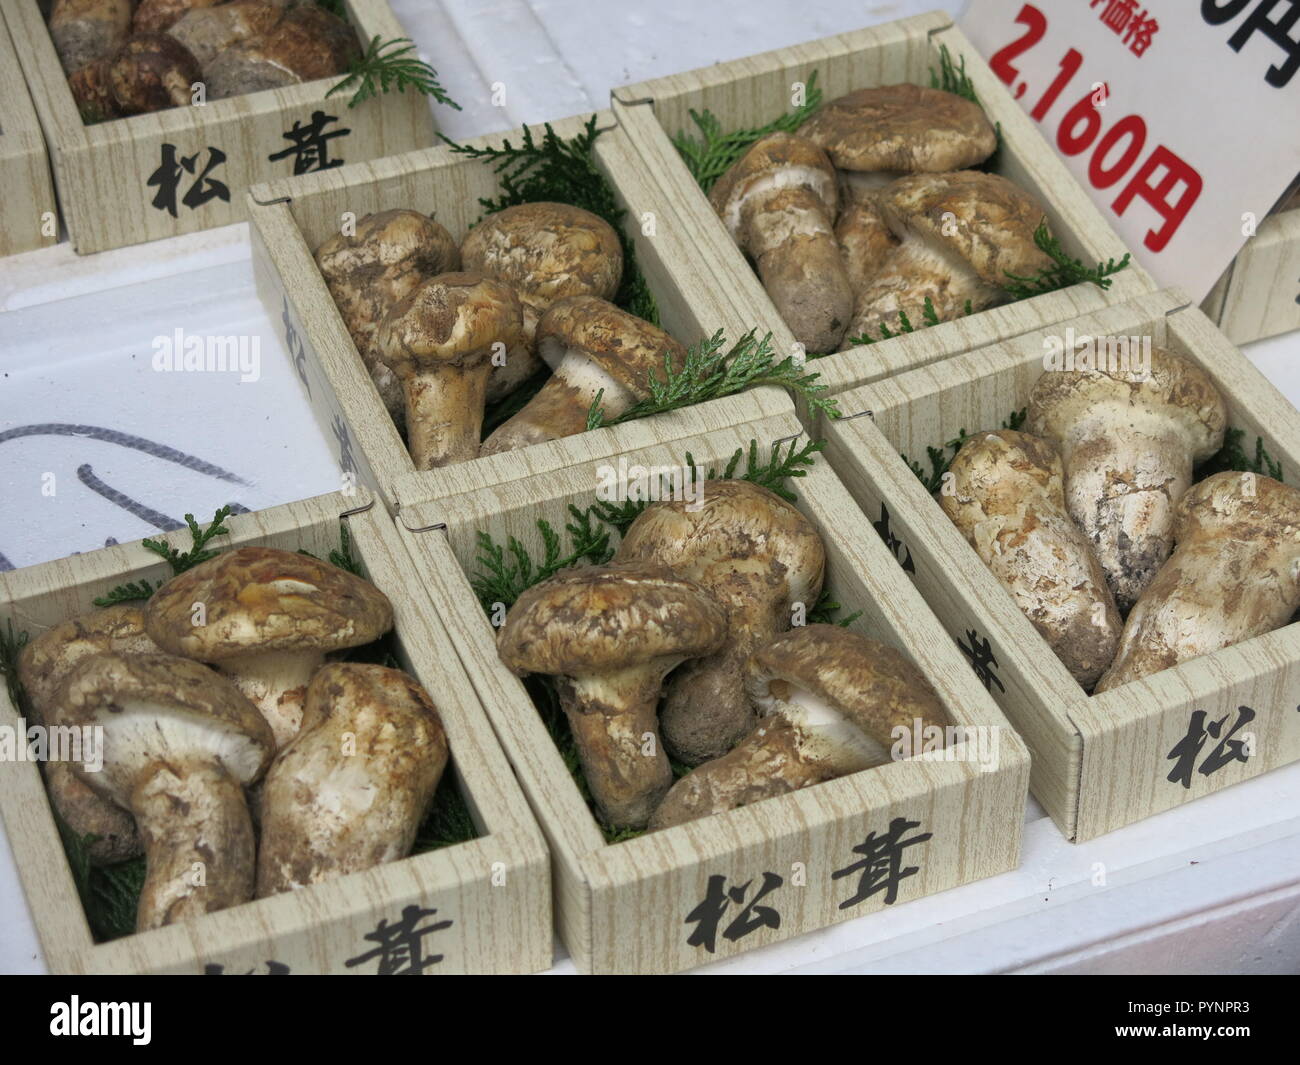 Mushrooms for sale at a Japanese street market in central Tokyo Stock Photo